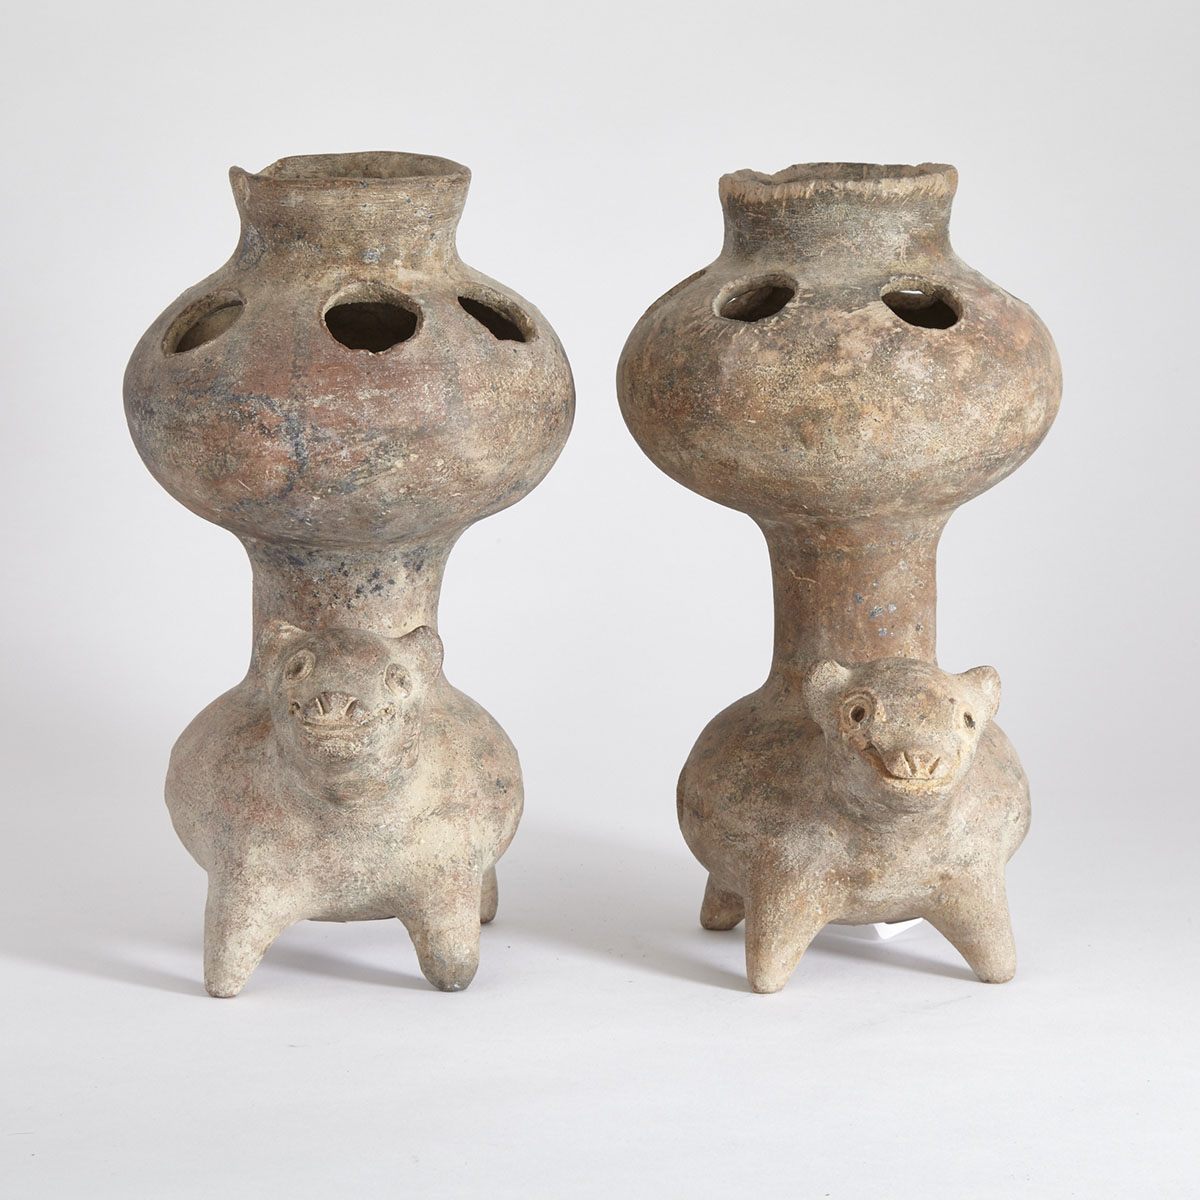 Pair of Colima Pottery Dog Form Censers, Proto-Classic Period, 100 B.C.- 250 A.D.